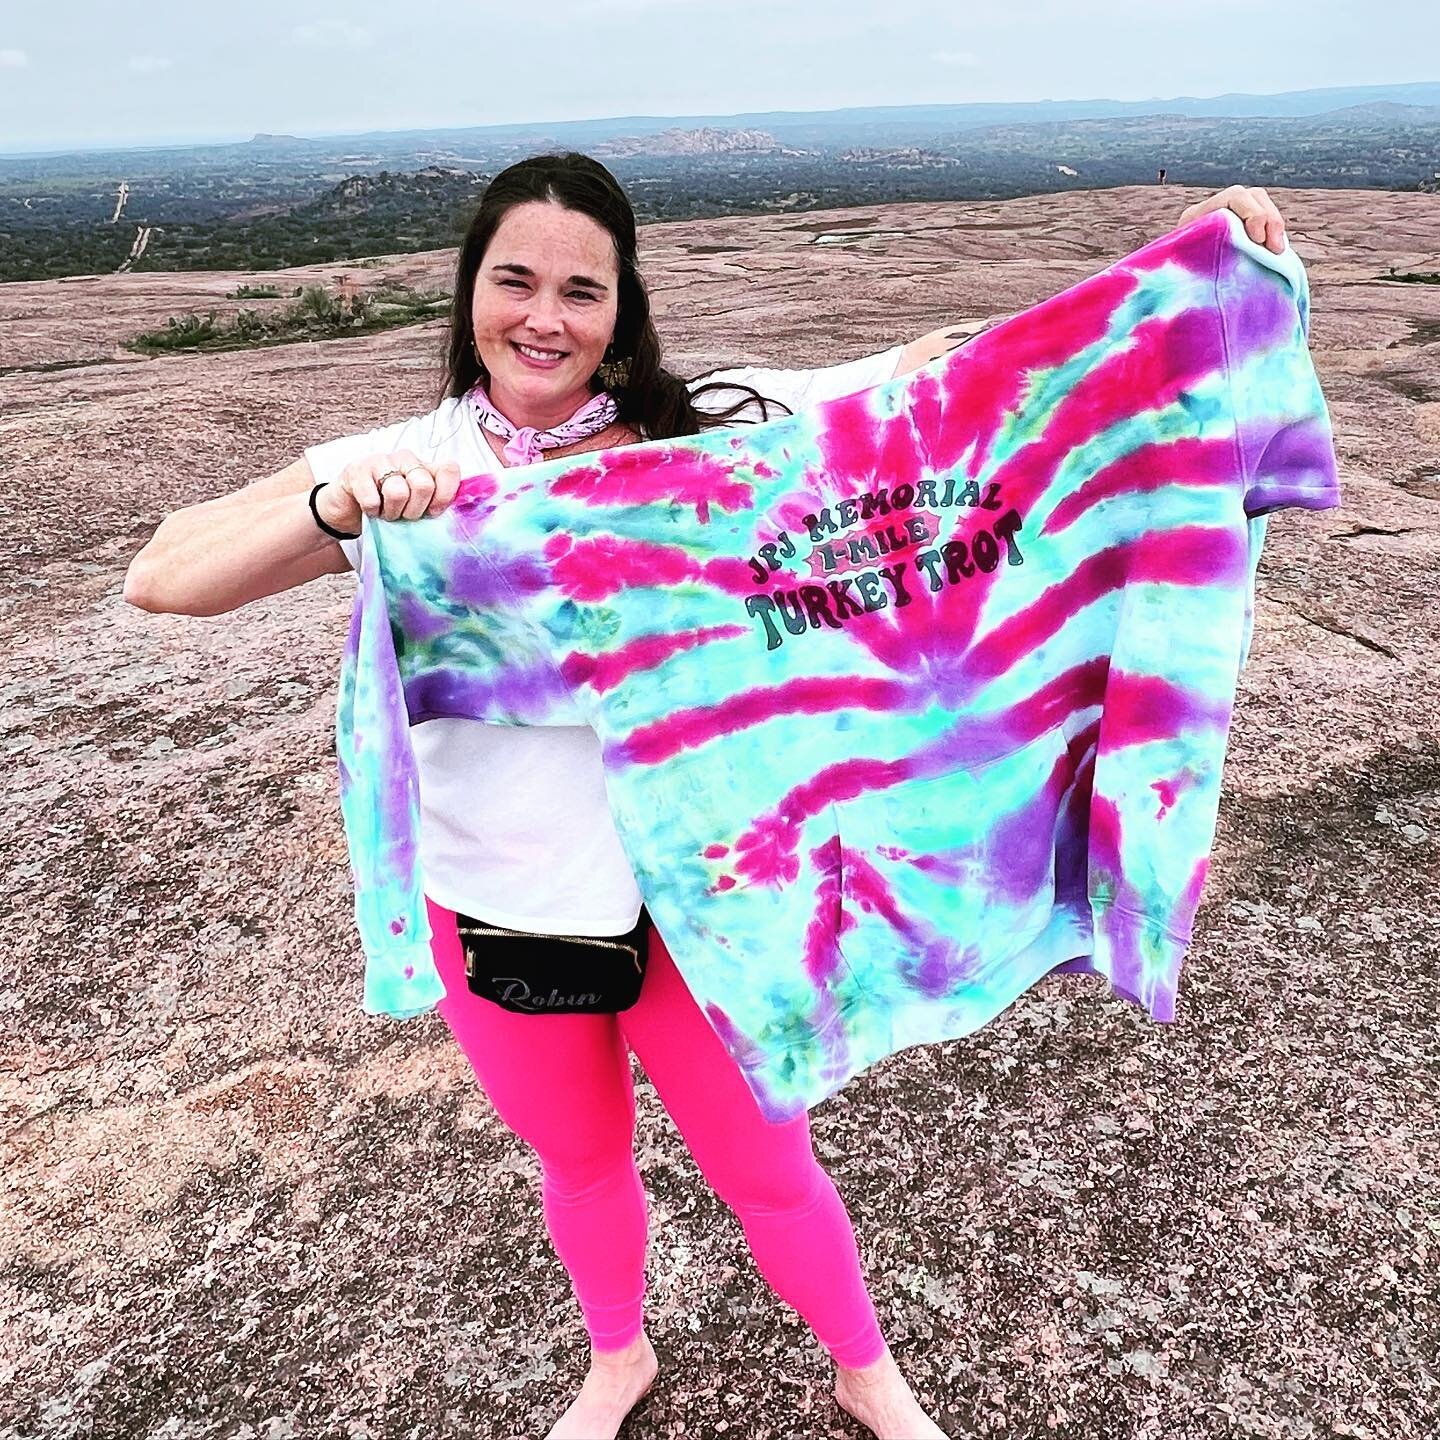 Thinking of how much Jean Paul would love this place! 
.
.
.
#missingjp #jpjturkeytrot #enchantedrock #hillcountrytx